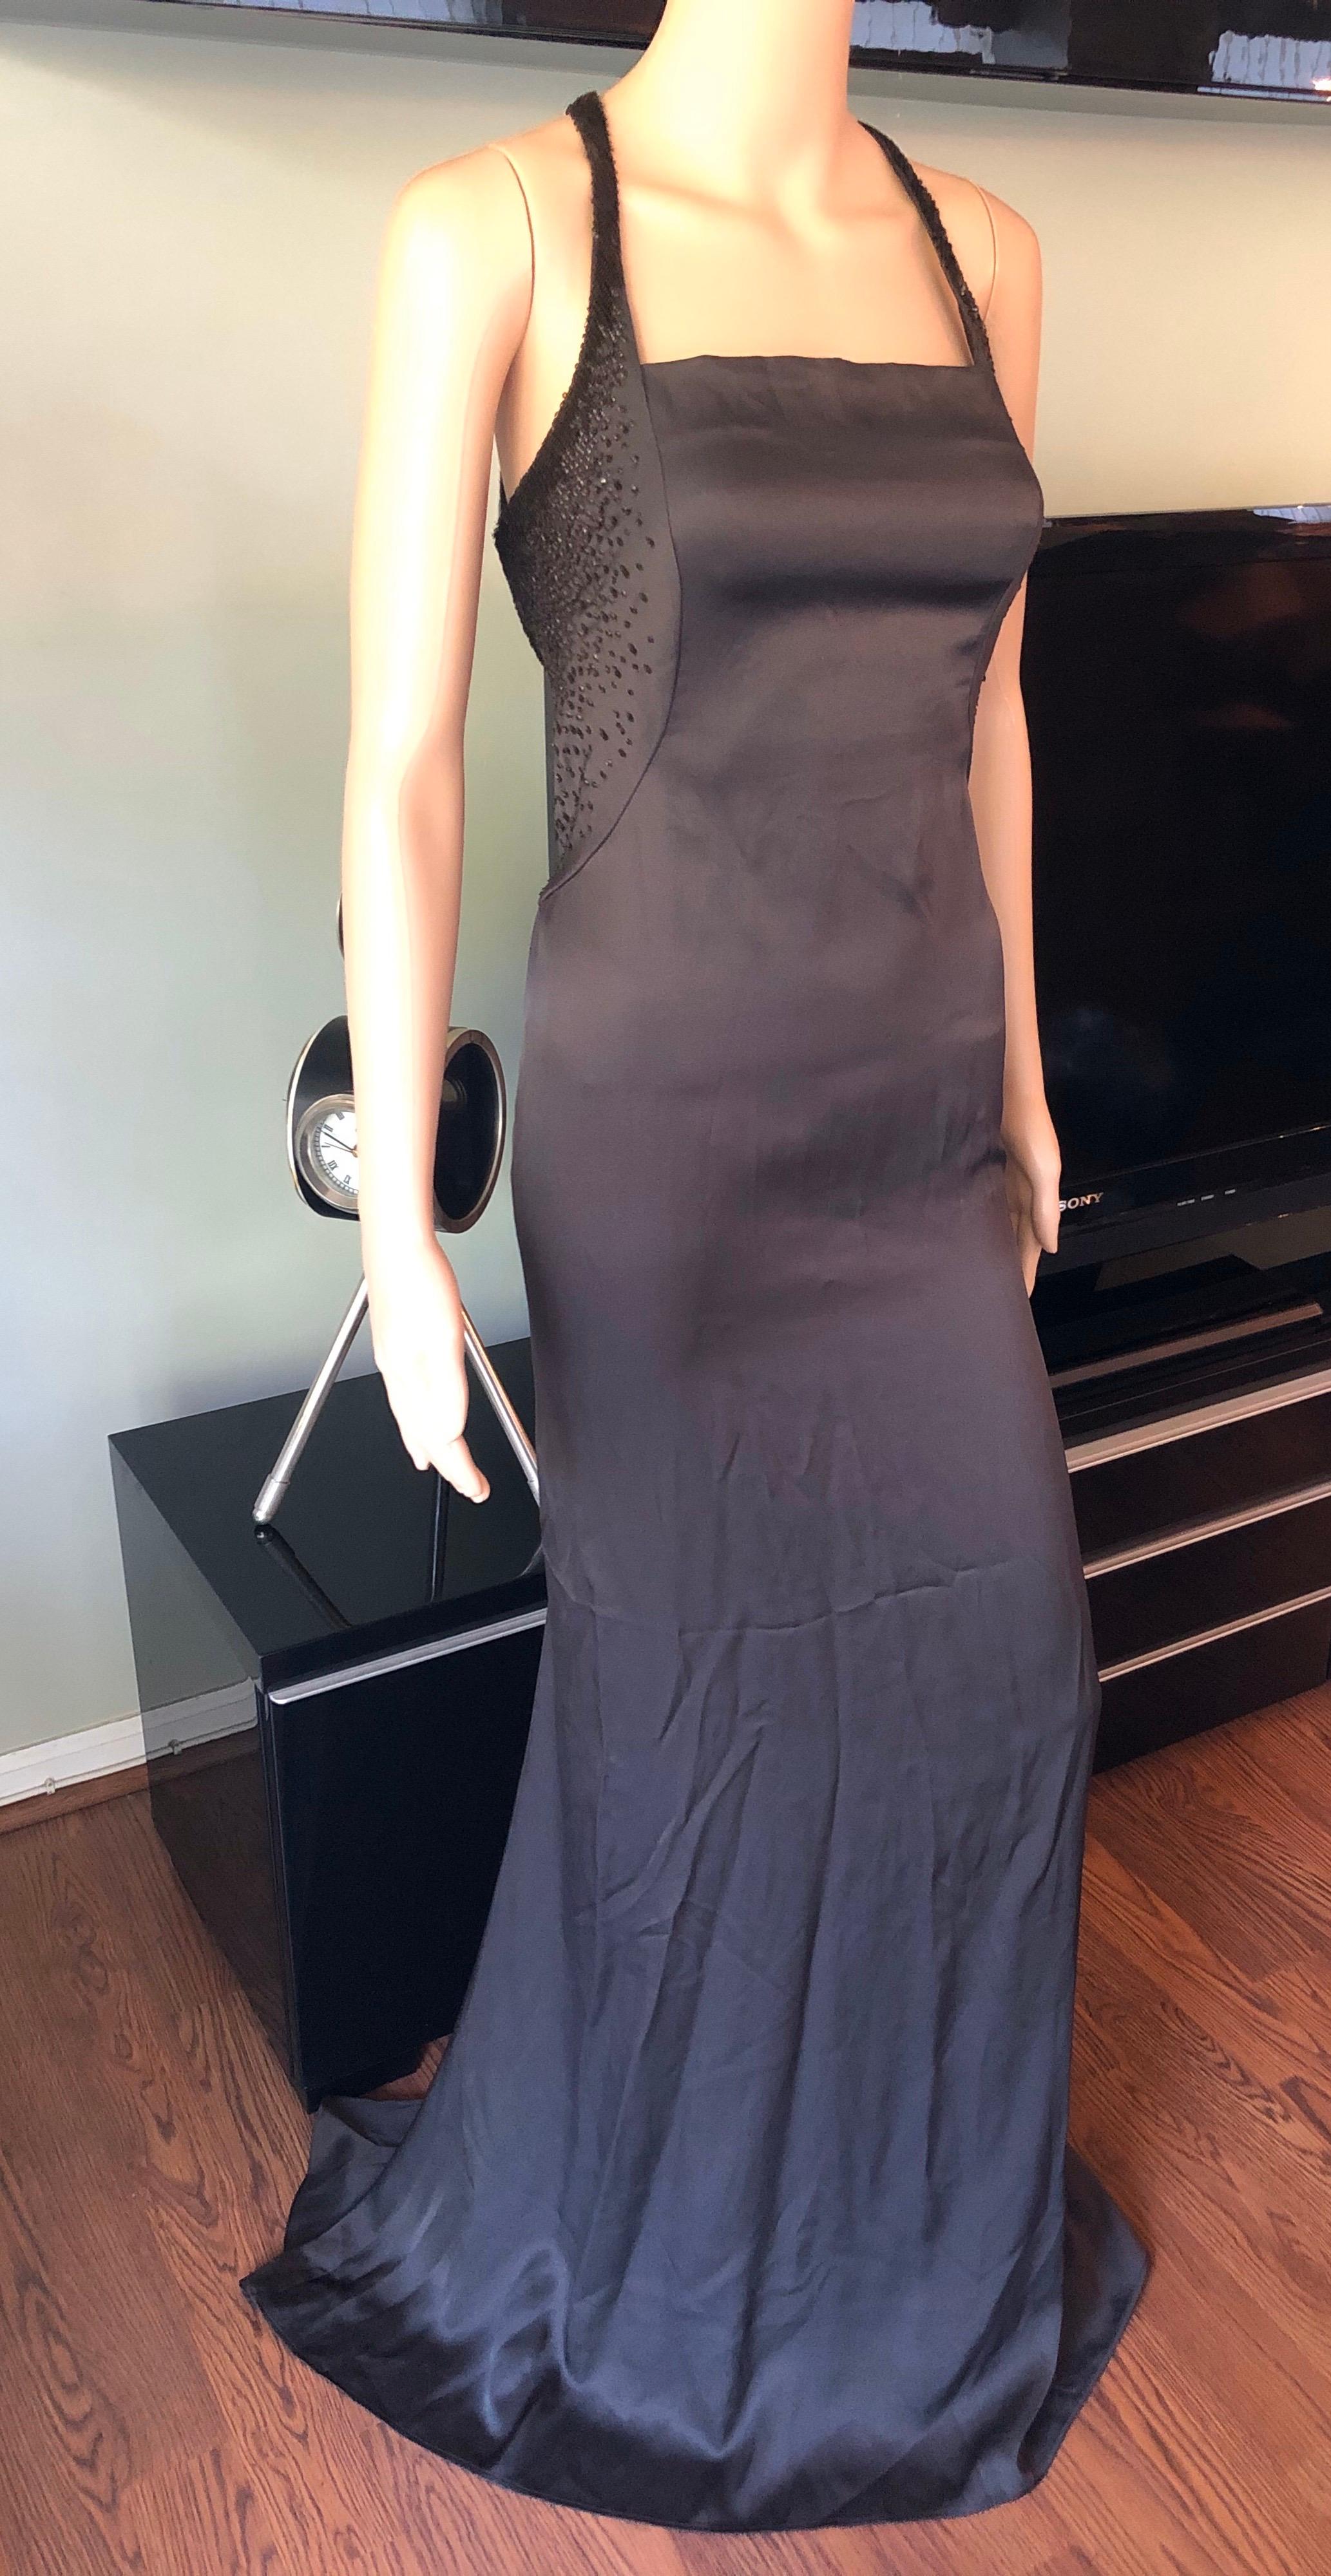 Tom Ford for Gucci c. 2001 Cutout Back Embellished Brown Evening Dress Gown For Sale 1